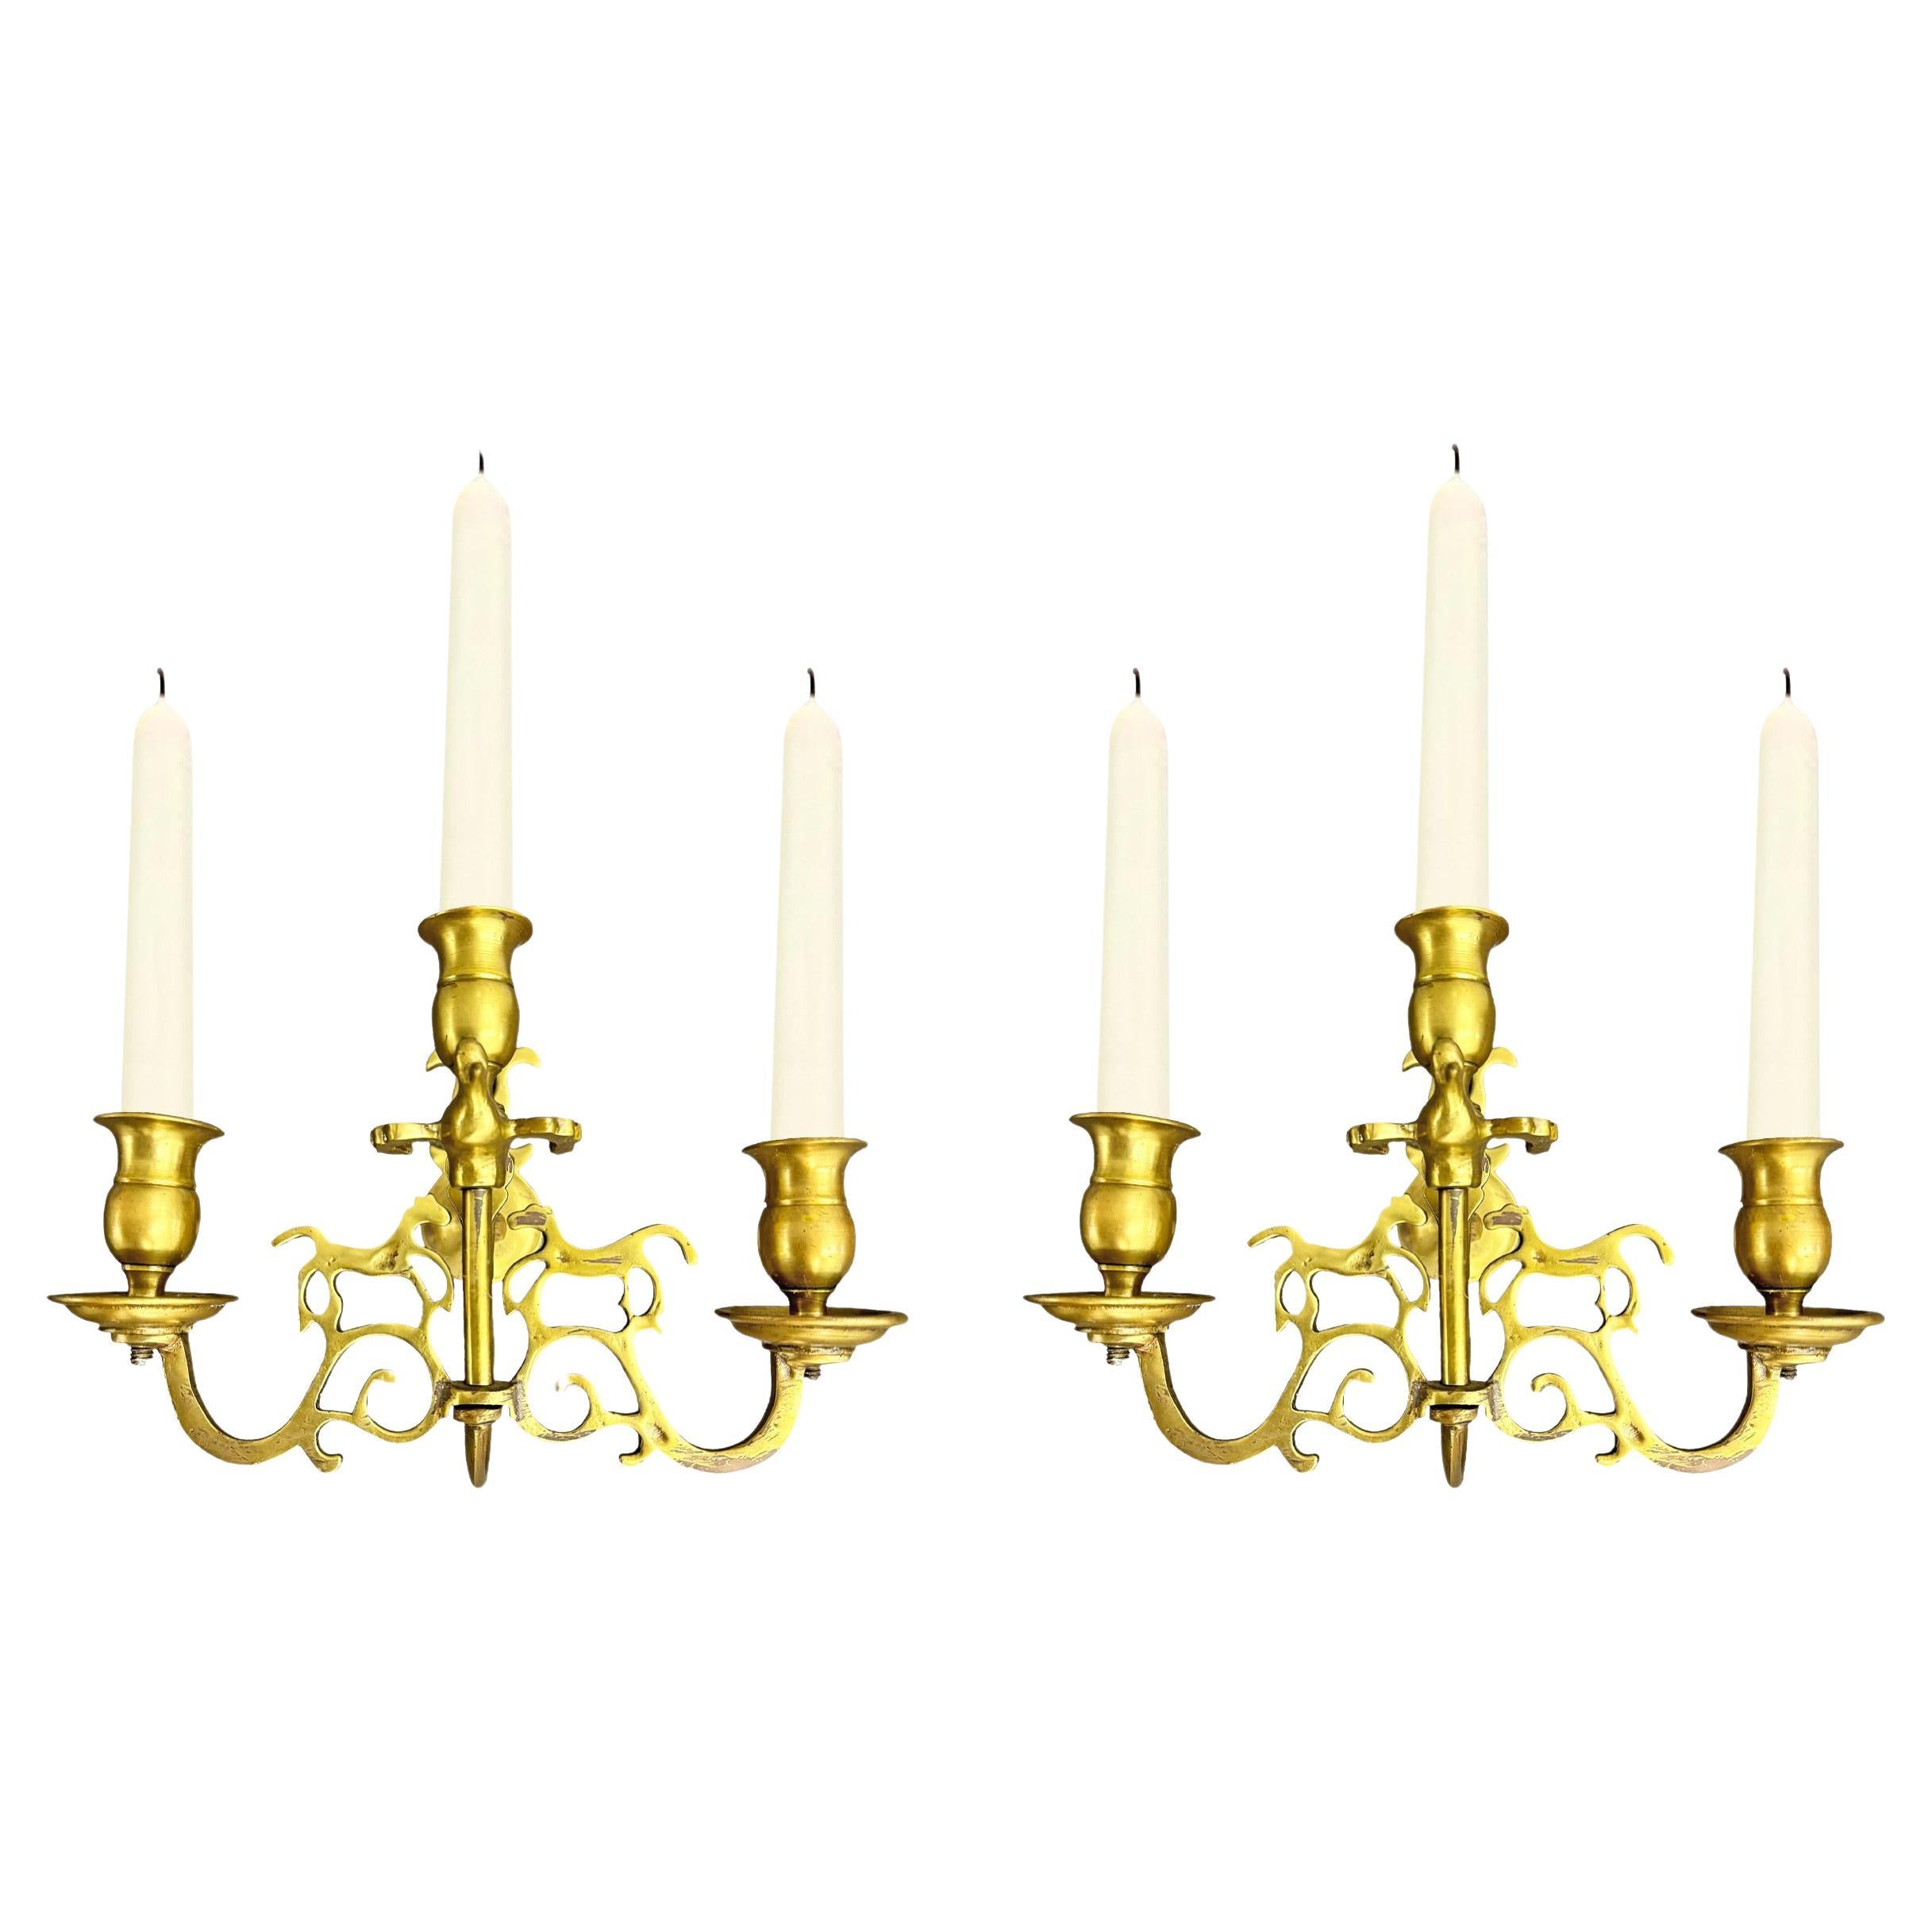 Pair of 18th Century English Georgian Brass Candle Sconces For Sale